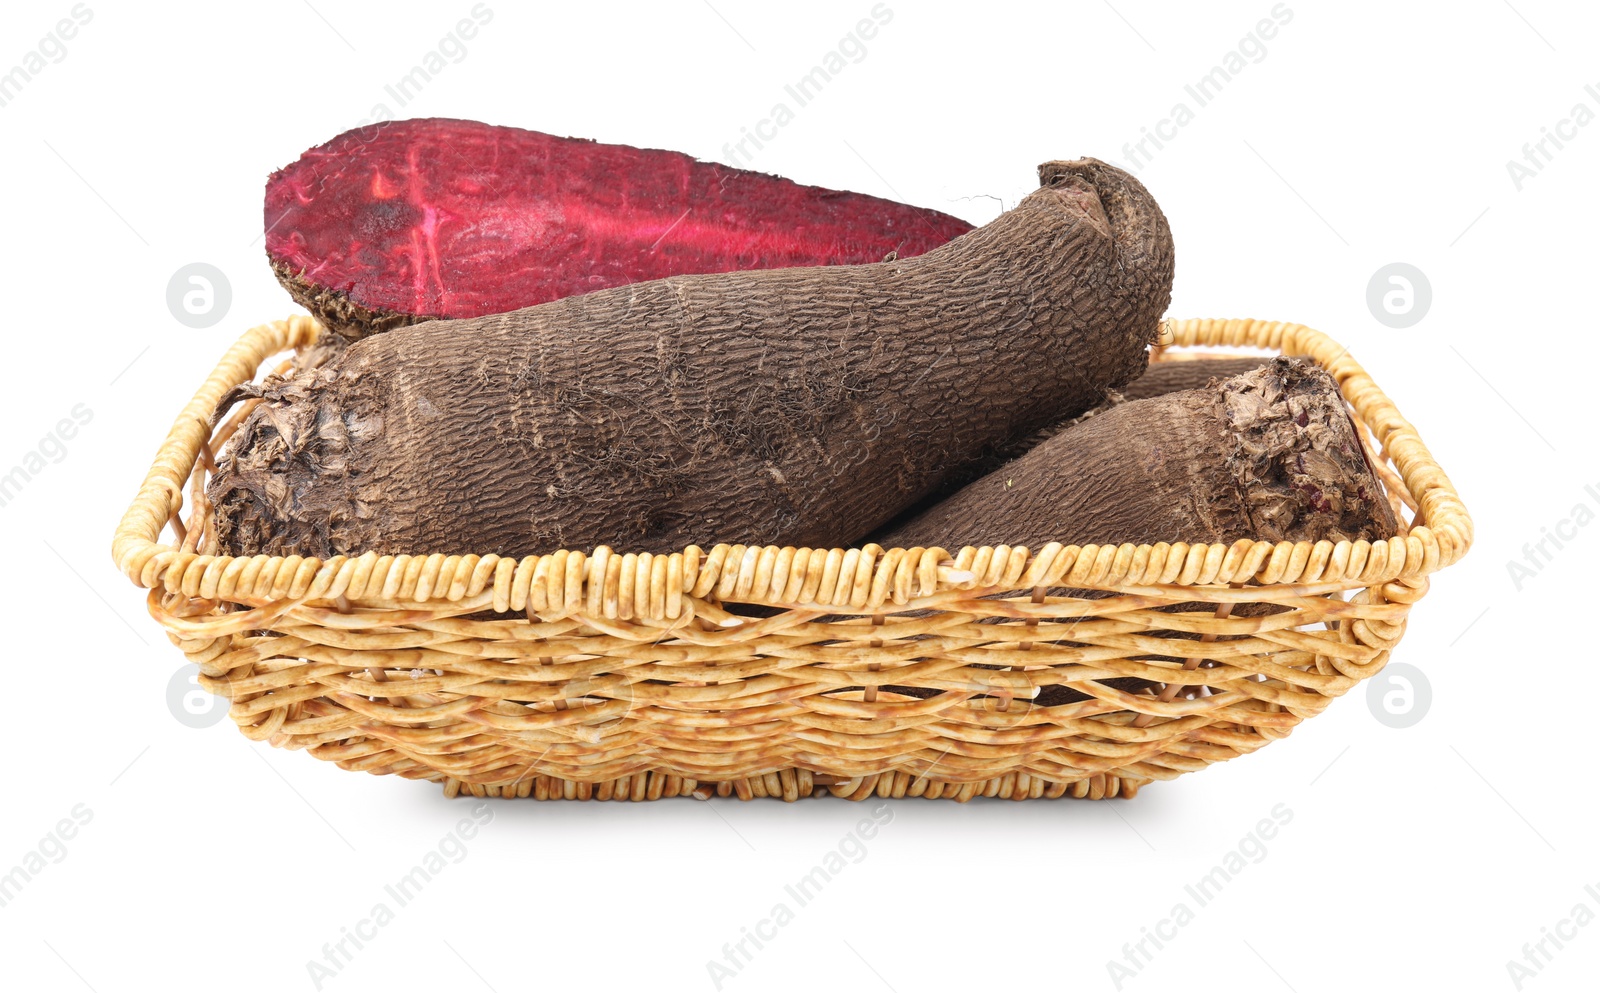 Photo of Whole and cut red beets in wicker basket isolated on white